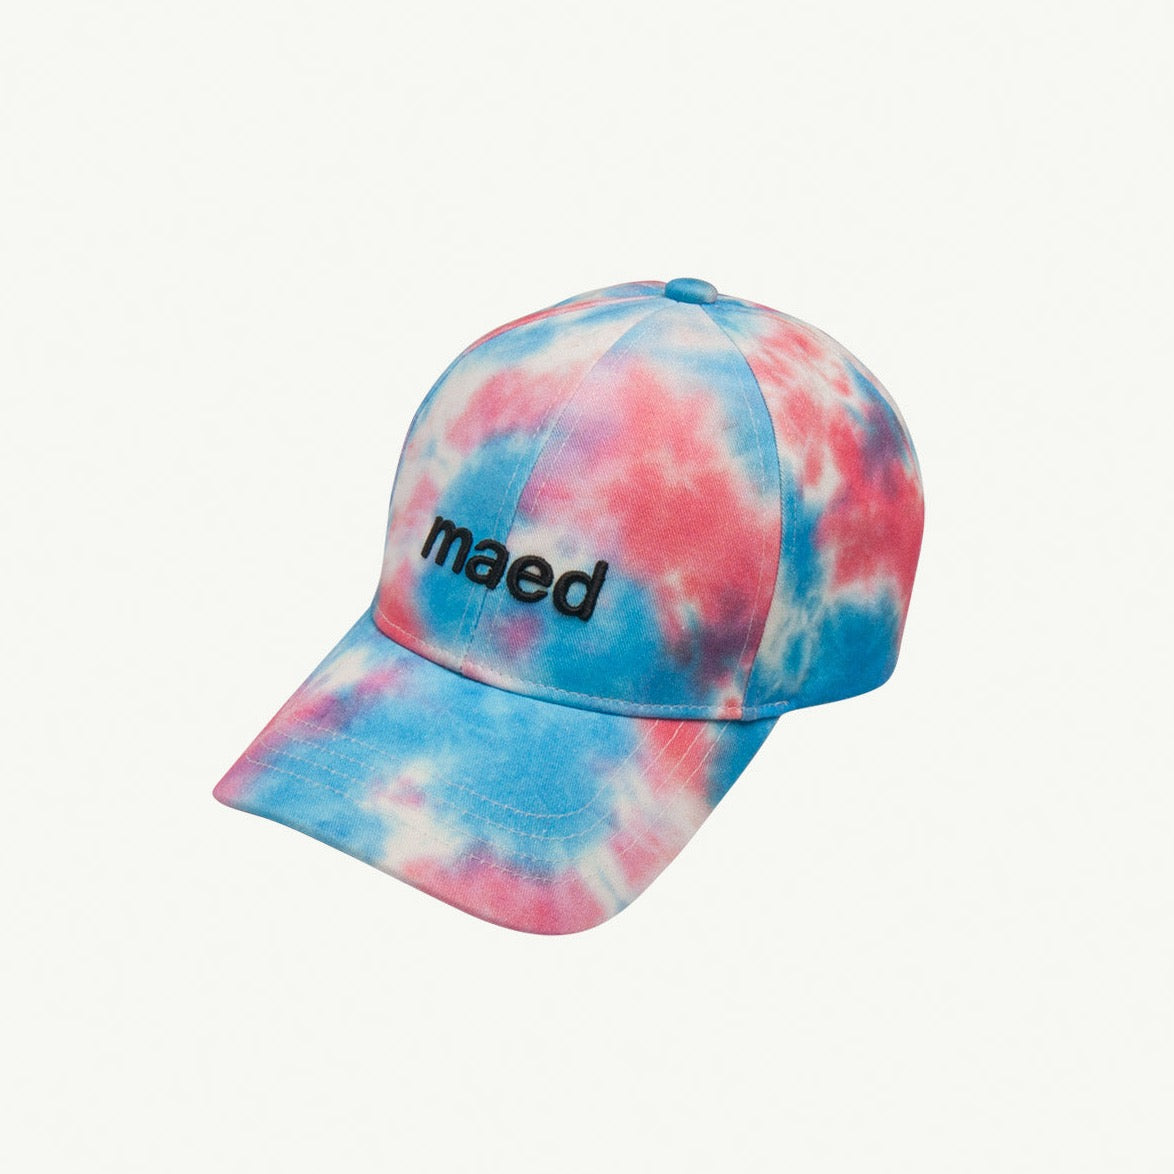 This picture shows a fitted cap with a pink and blue tie dye print. It has an adjustable strap at the back. 